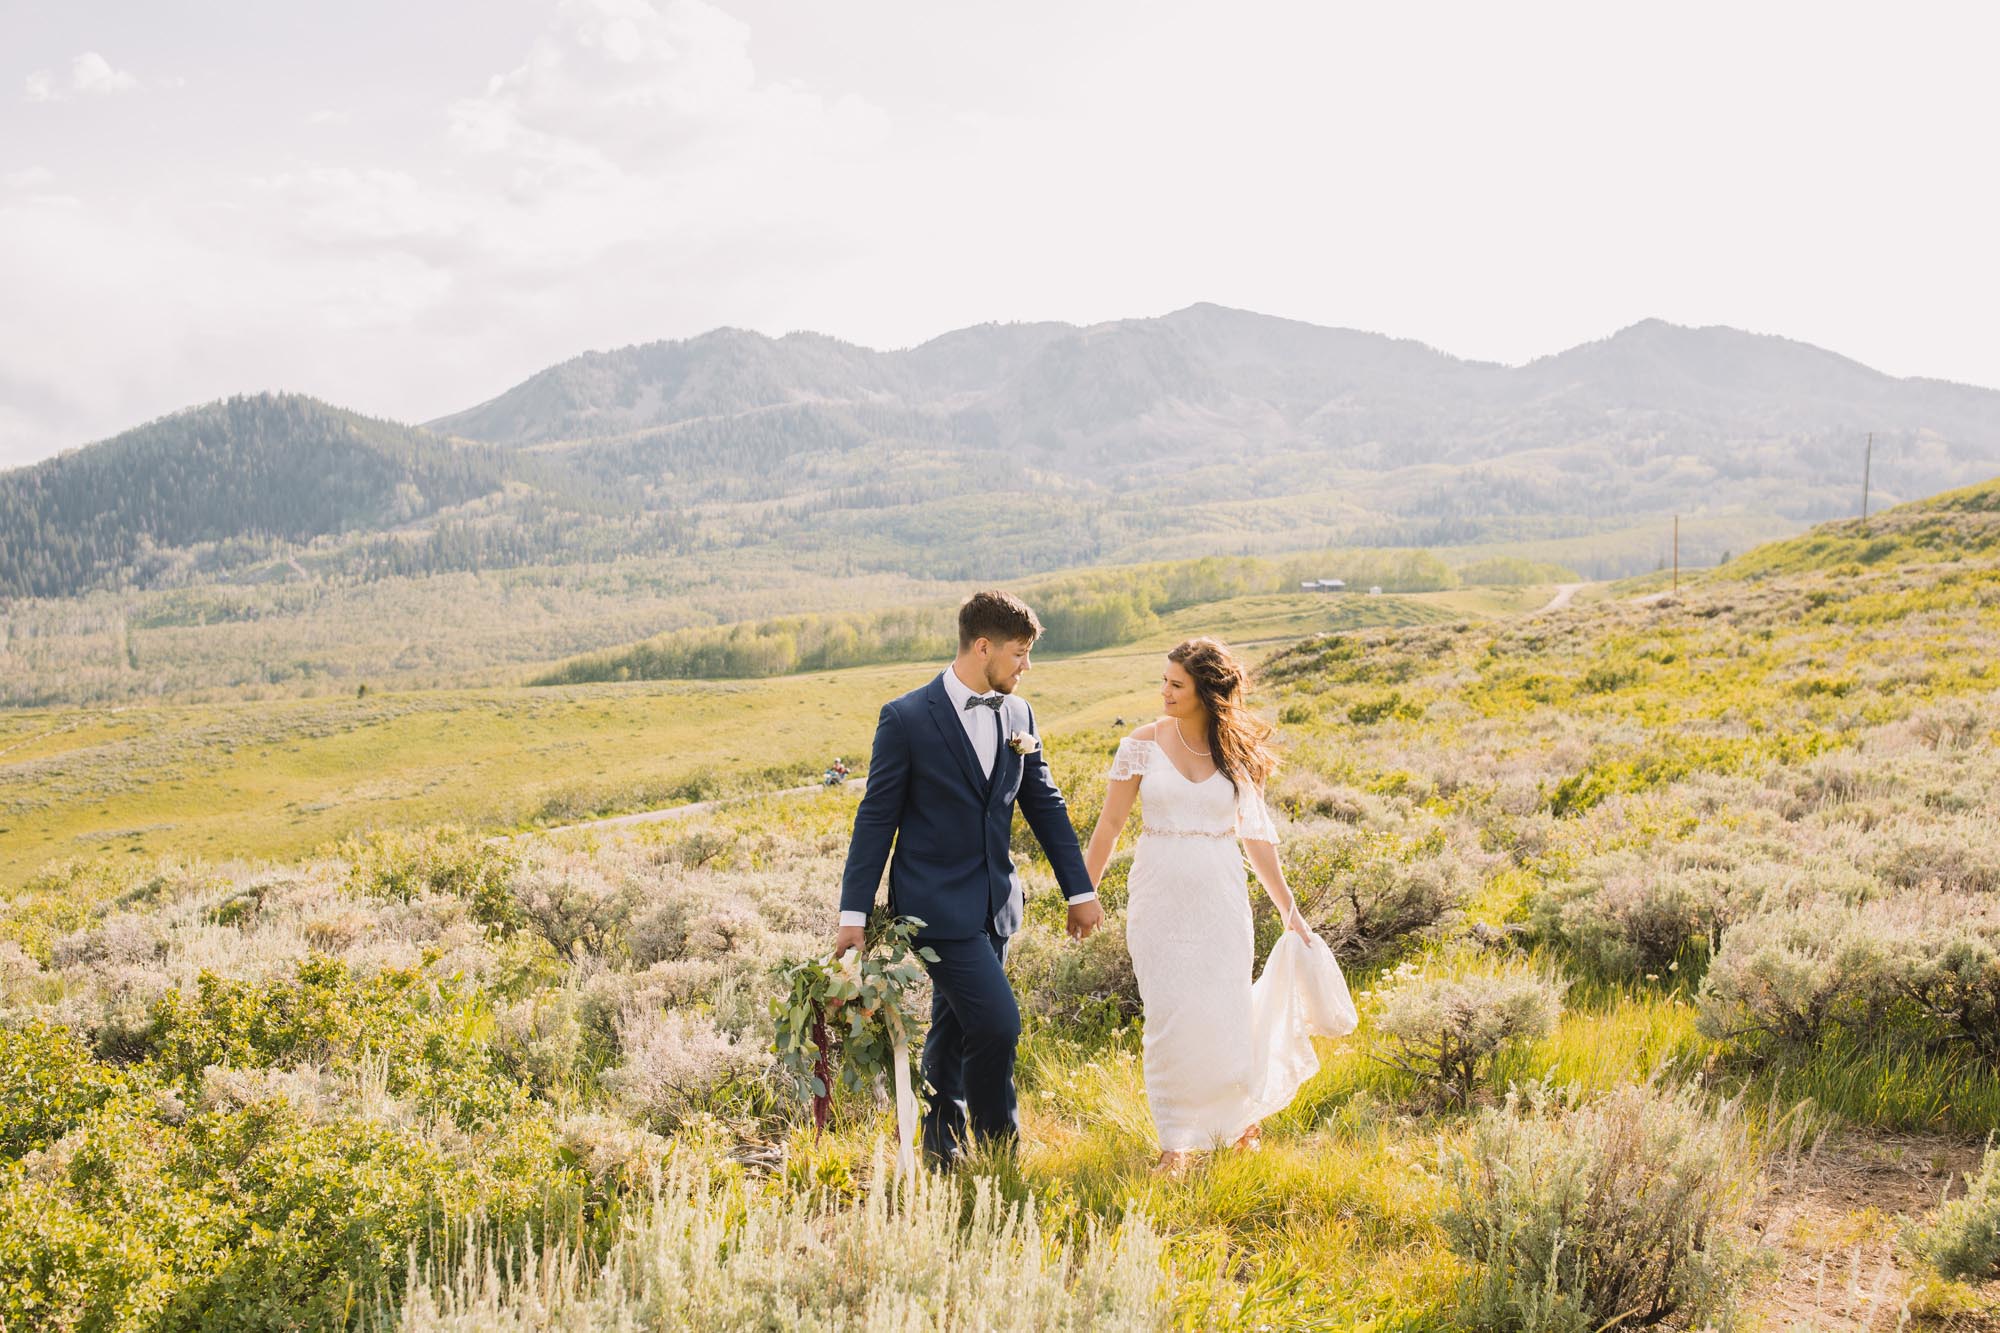 Cassie + Nick | Park City Wedding at Church of Dirt by Emily